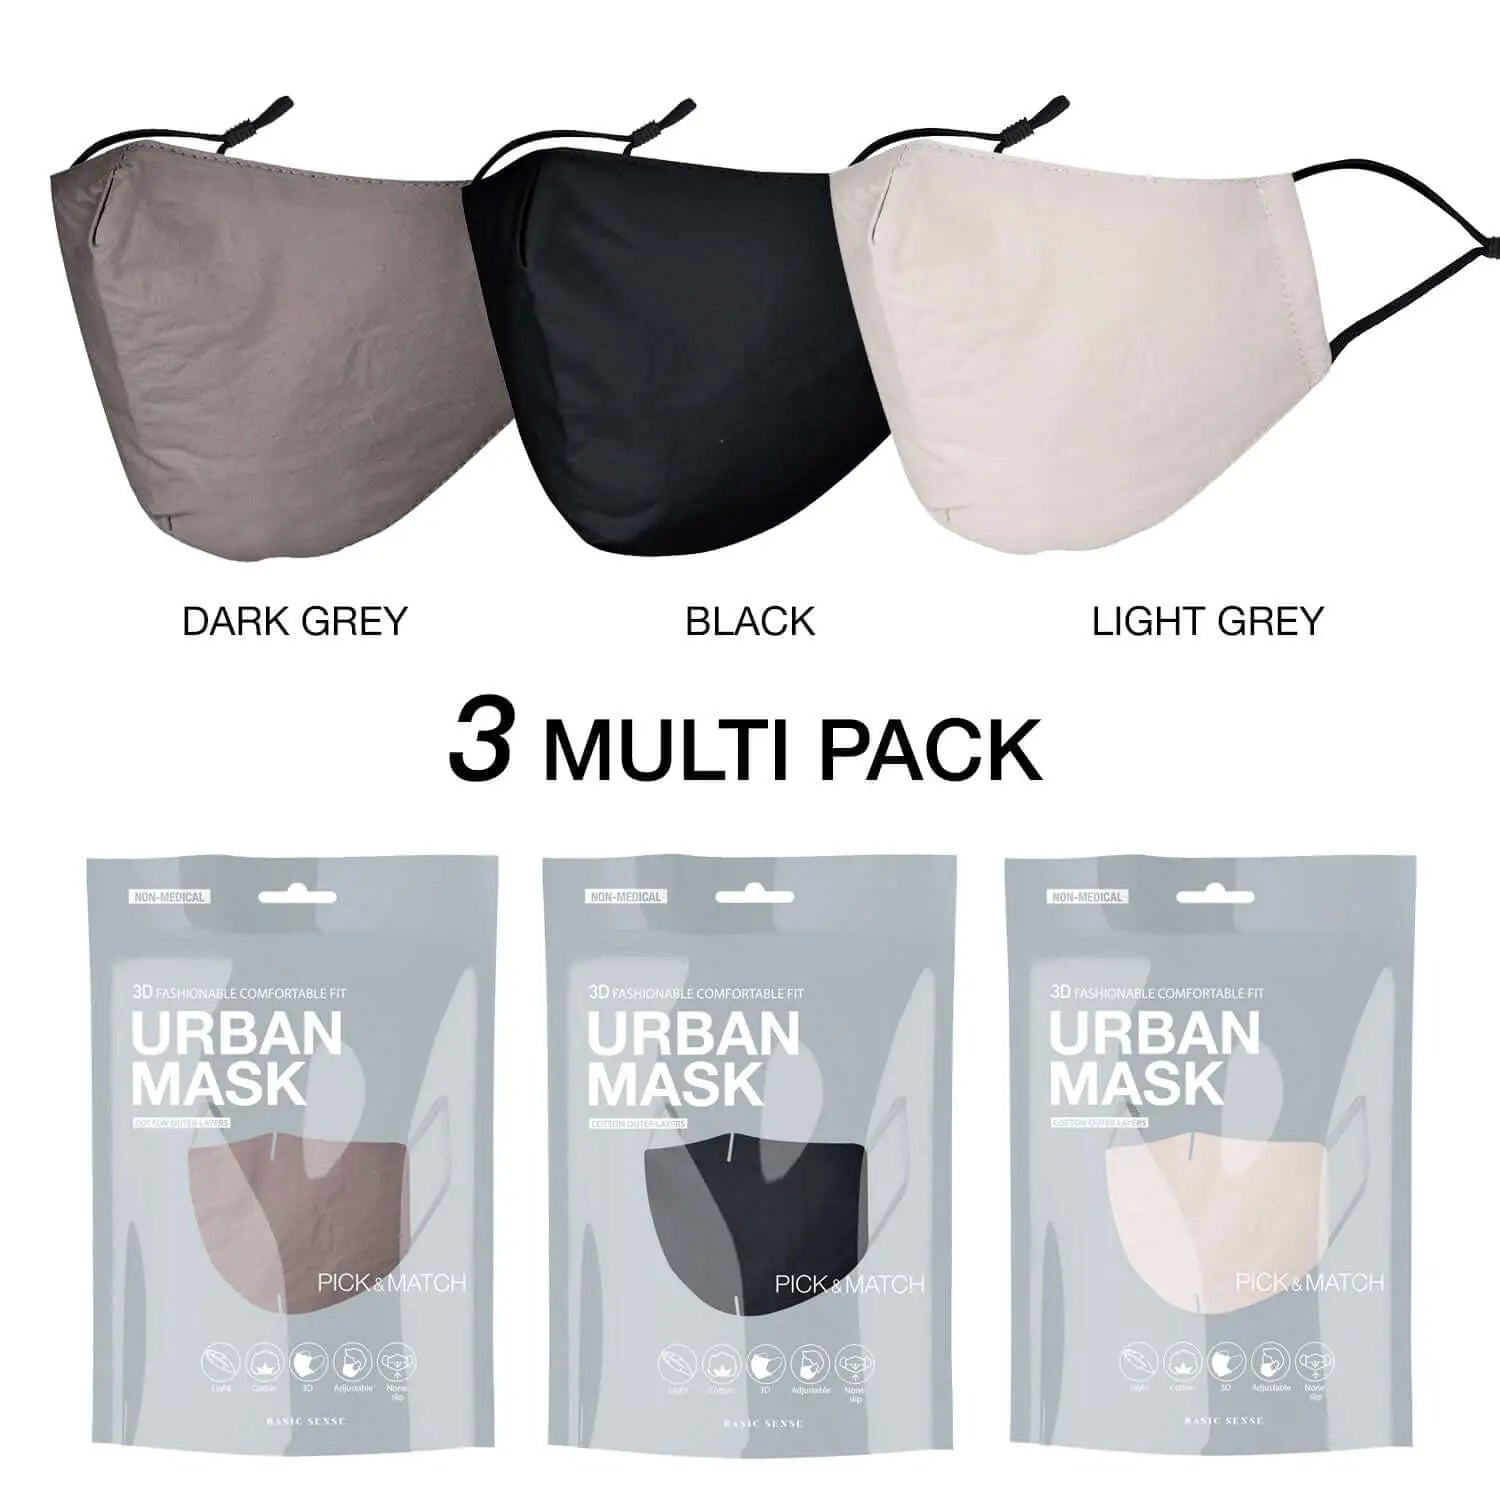 3-pack cotton fashion face masks in black, grey, and light grey colors